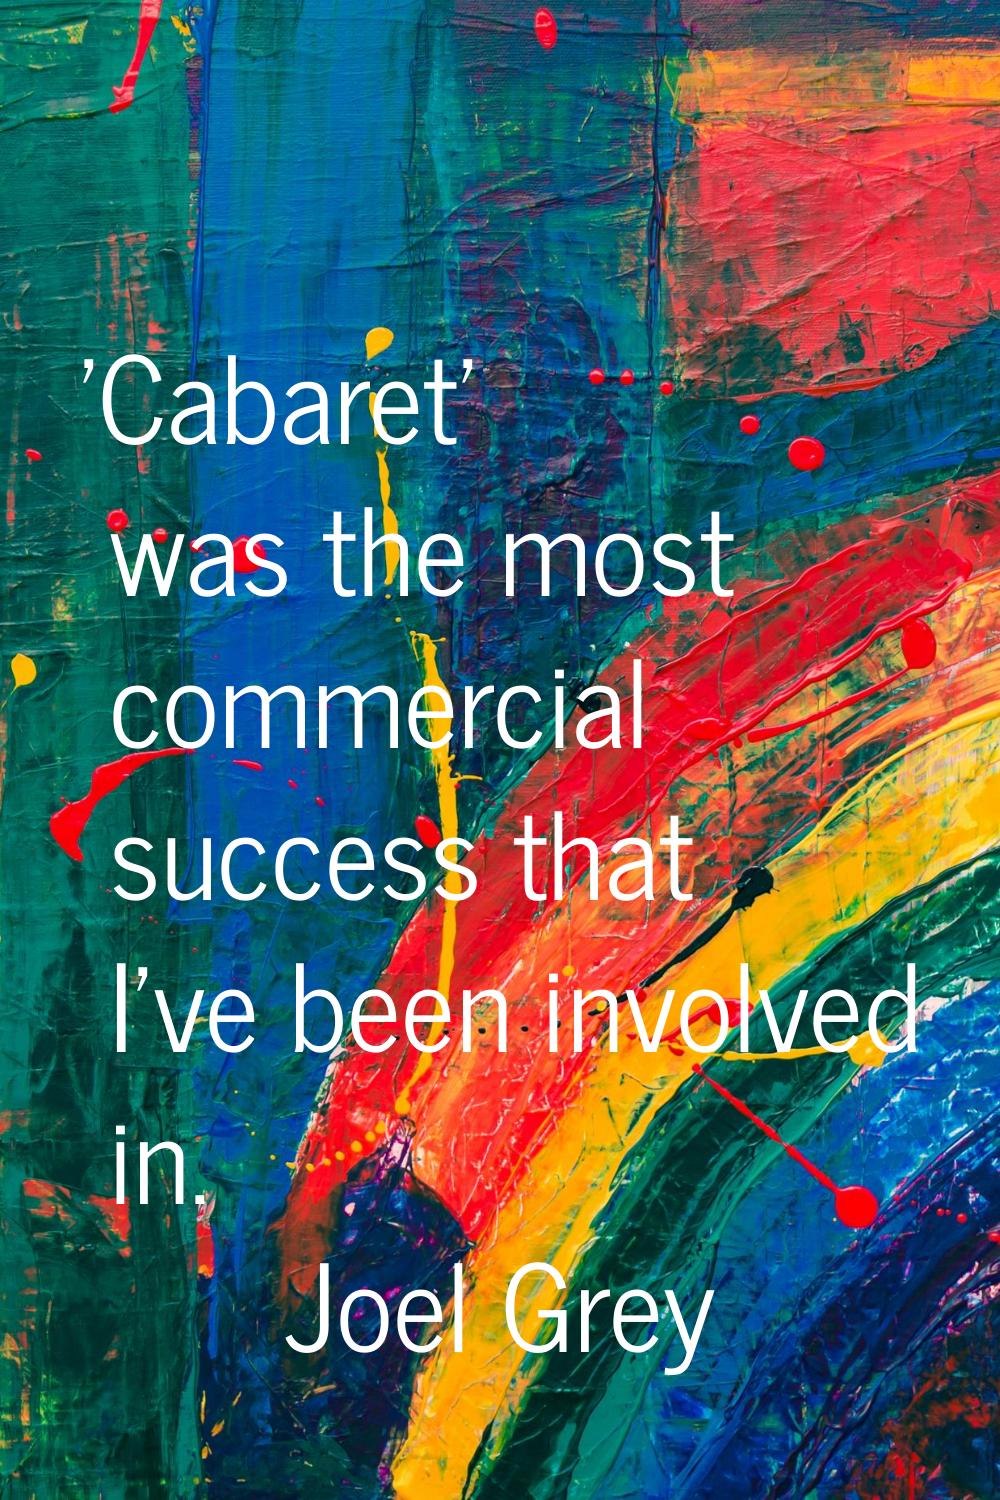 'Cabaret' was the most commercial success that I've been involved in.